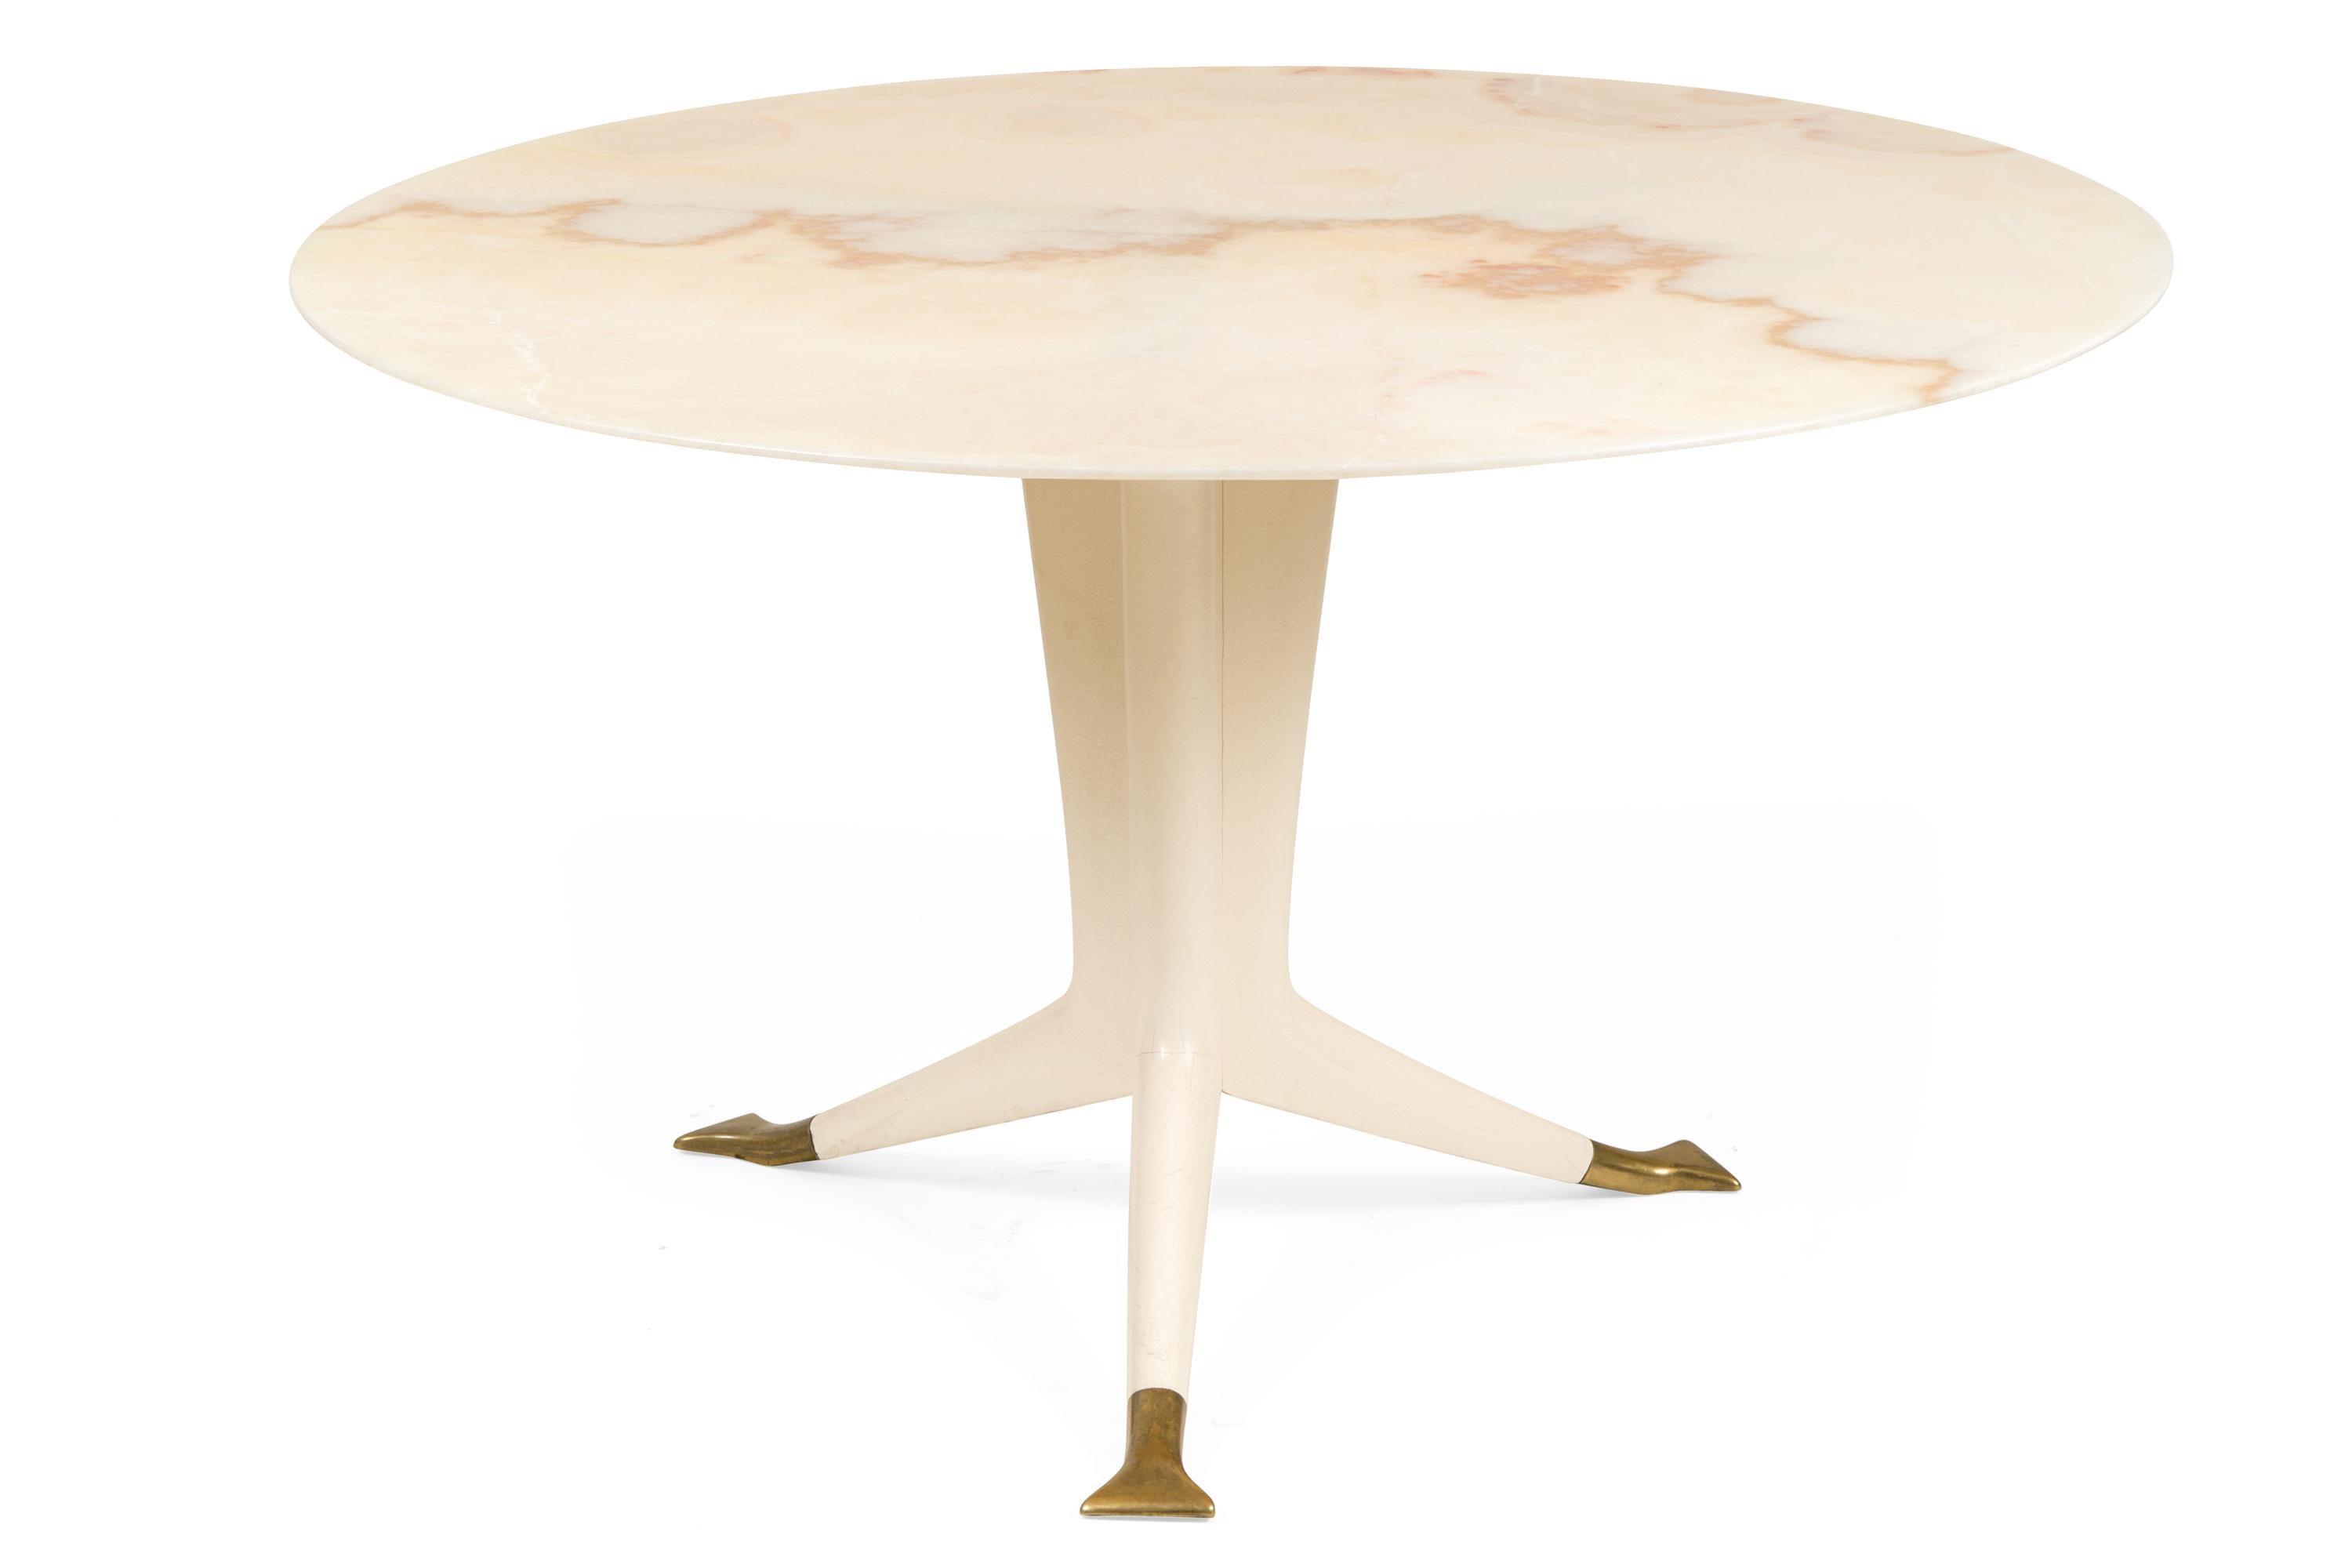 A rare and elegant table by Ico Parisi. The structure of the table is composed of a single truncated solid wood element which splits at the base into three long feet finished with flattened brass feet.